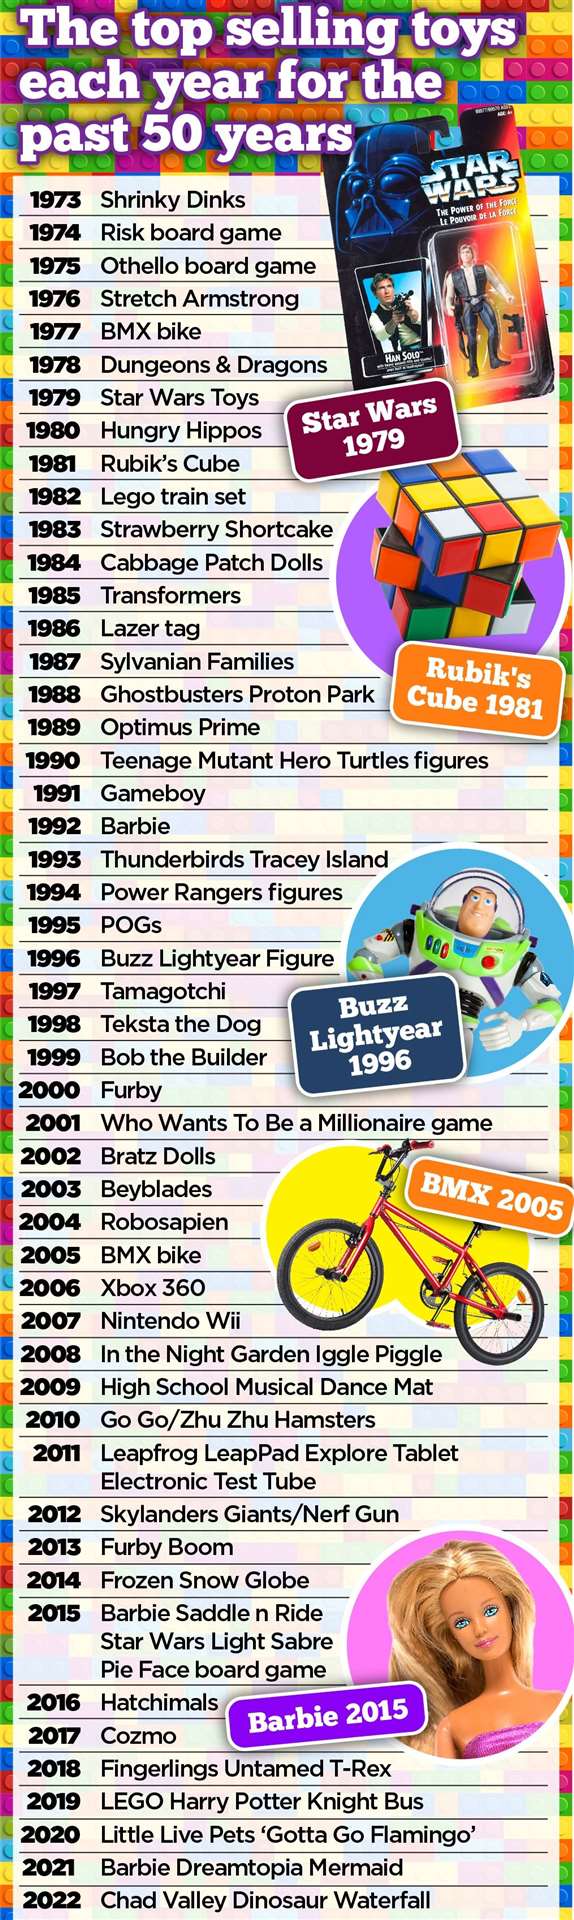 The best selling toys at Argos from the last 50 years